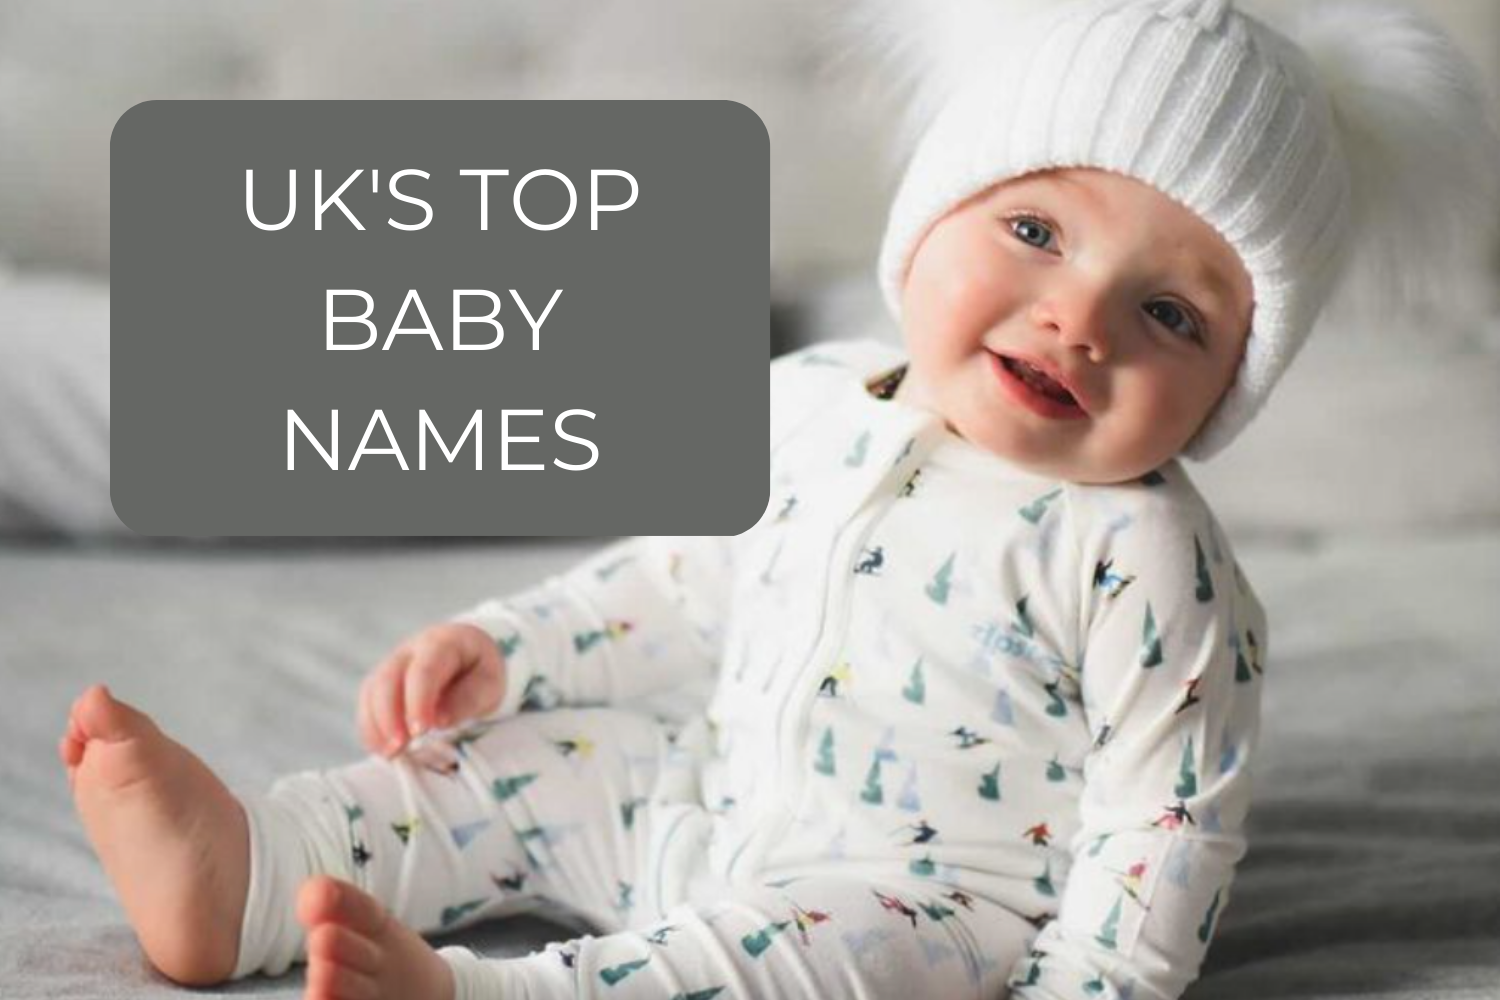 The UK's Top Baby Names Revealed